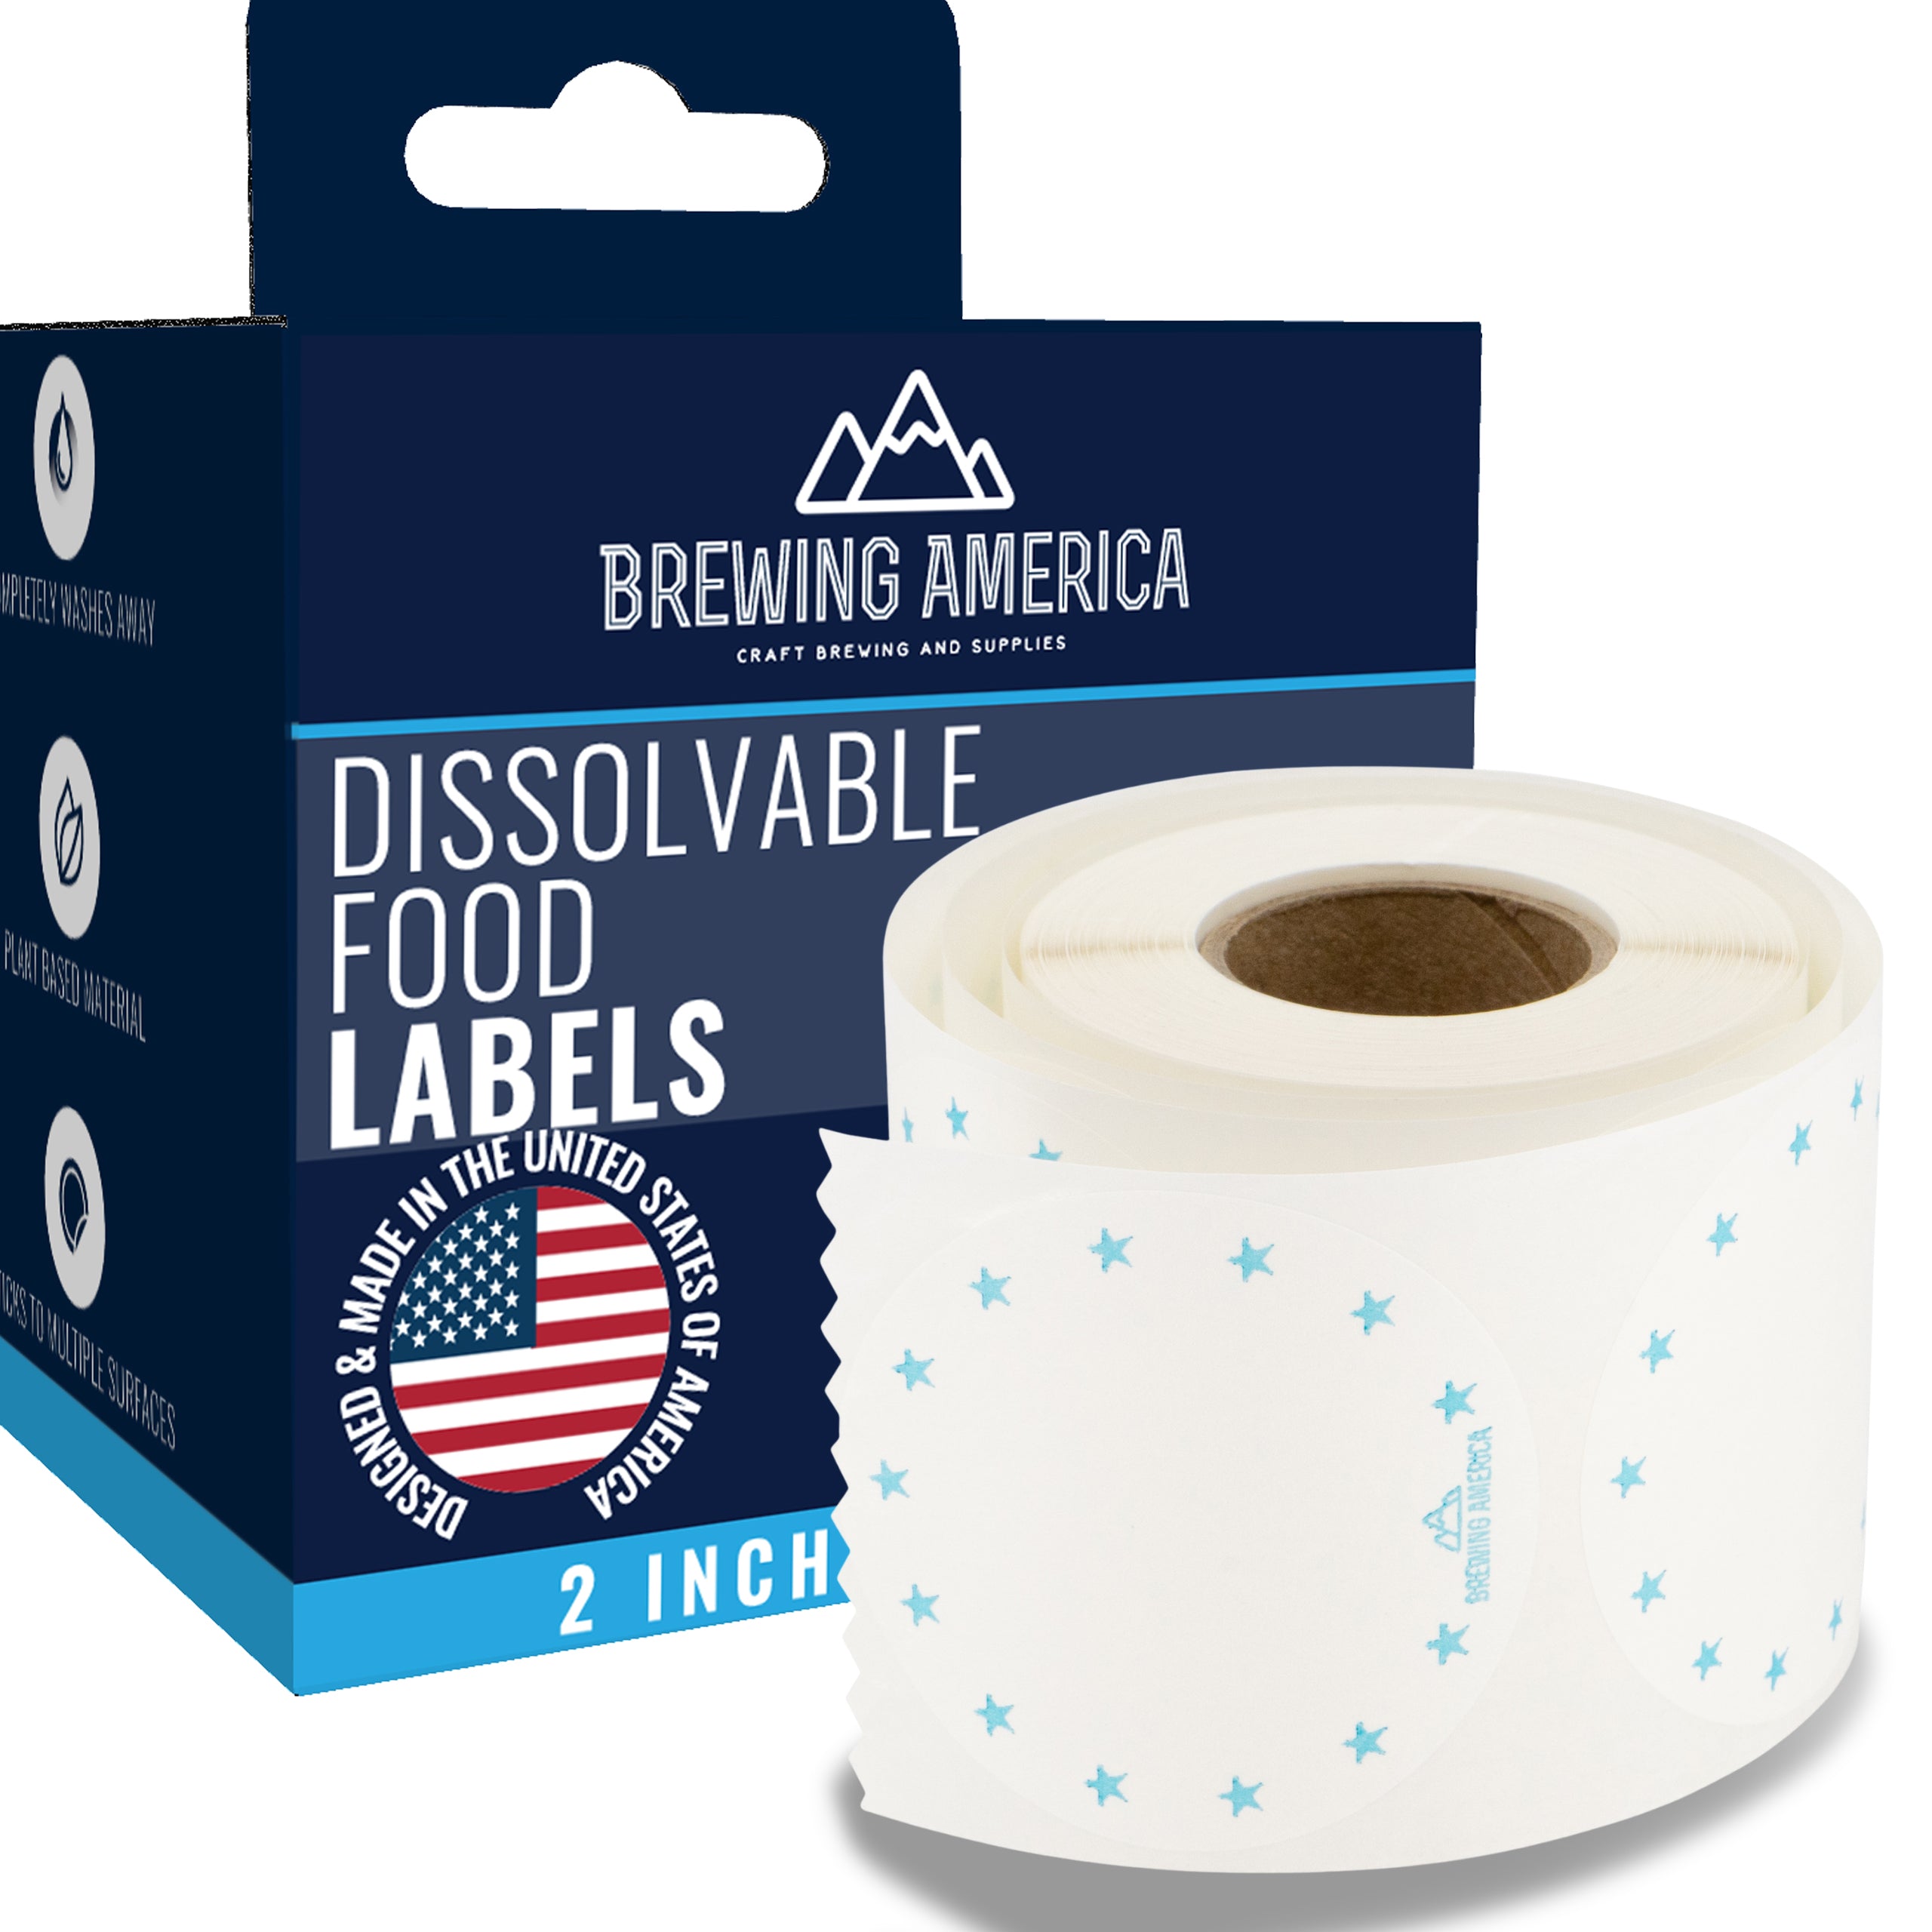 Dissolvable Food Labels for Food Containers Glass, Plastic or Metal No Scrubbing, No Residue - 2 Inch Round TEAL Accessories Brewing America 